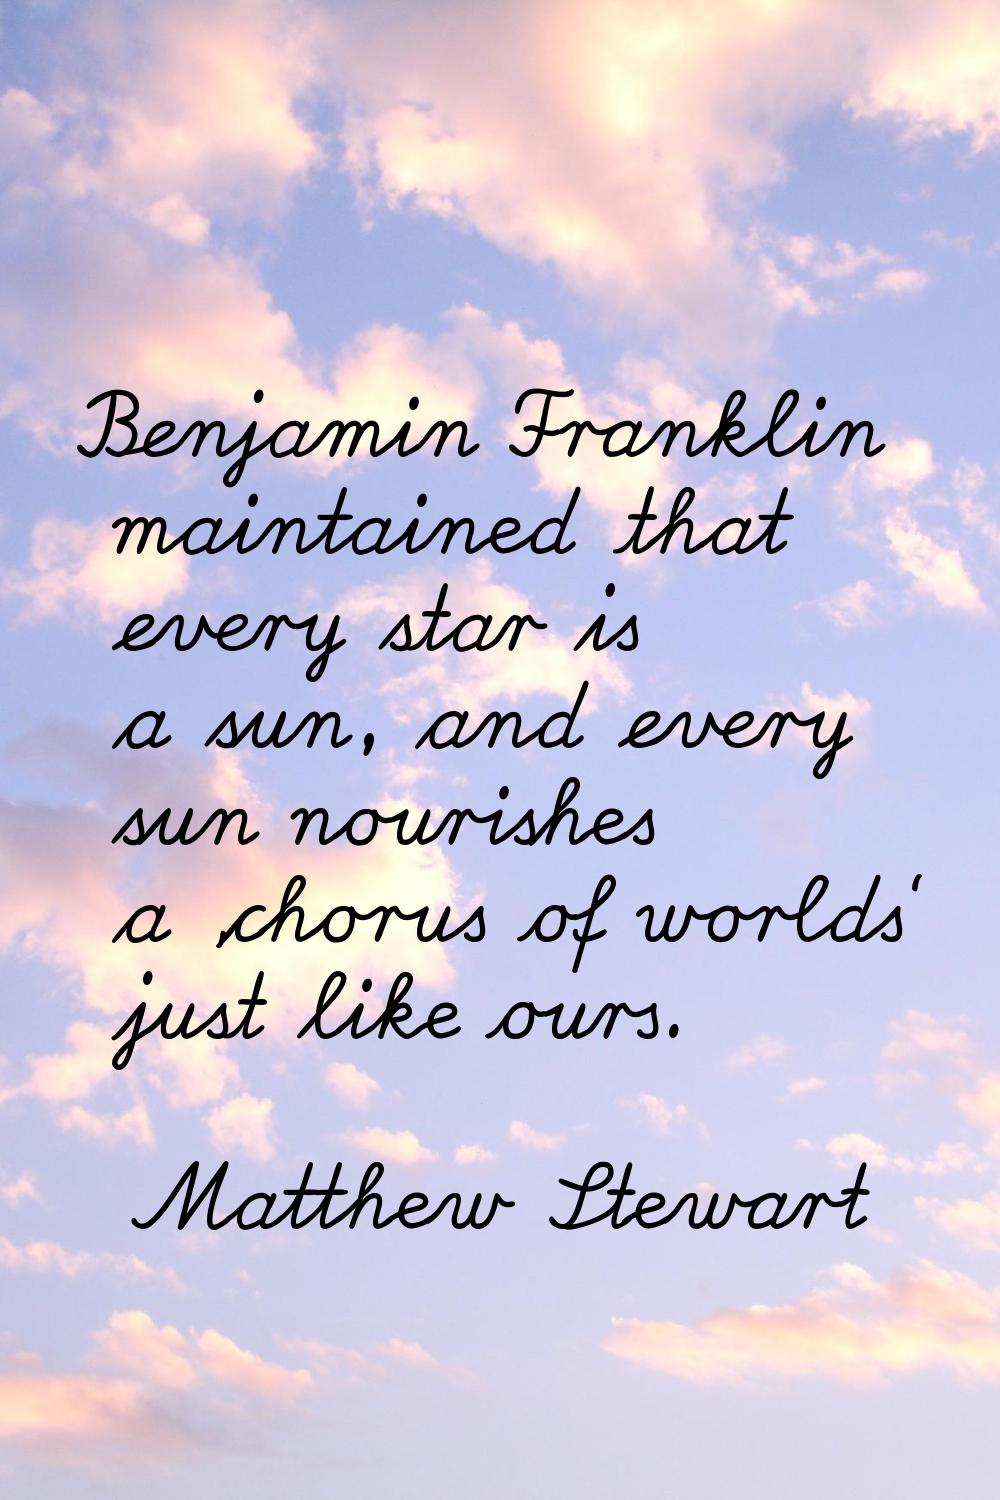 Benjamin Franklin maintained that every star is a sun, and every sun nourishes a 'chorus of worlds'